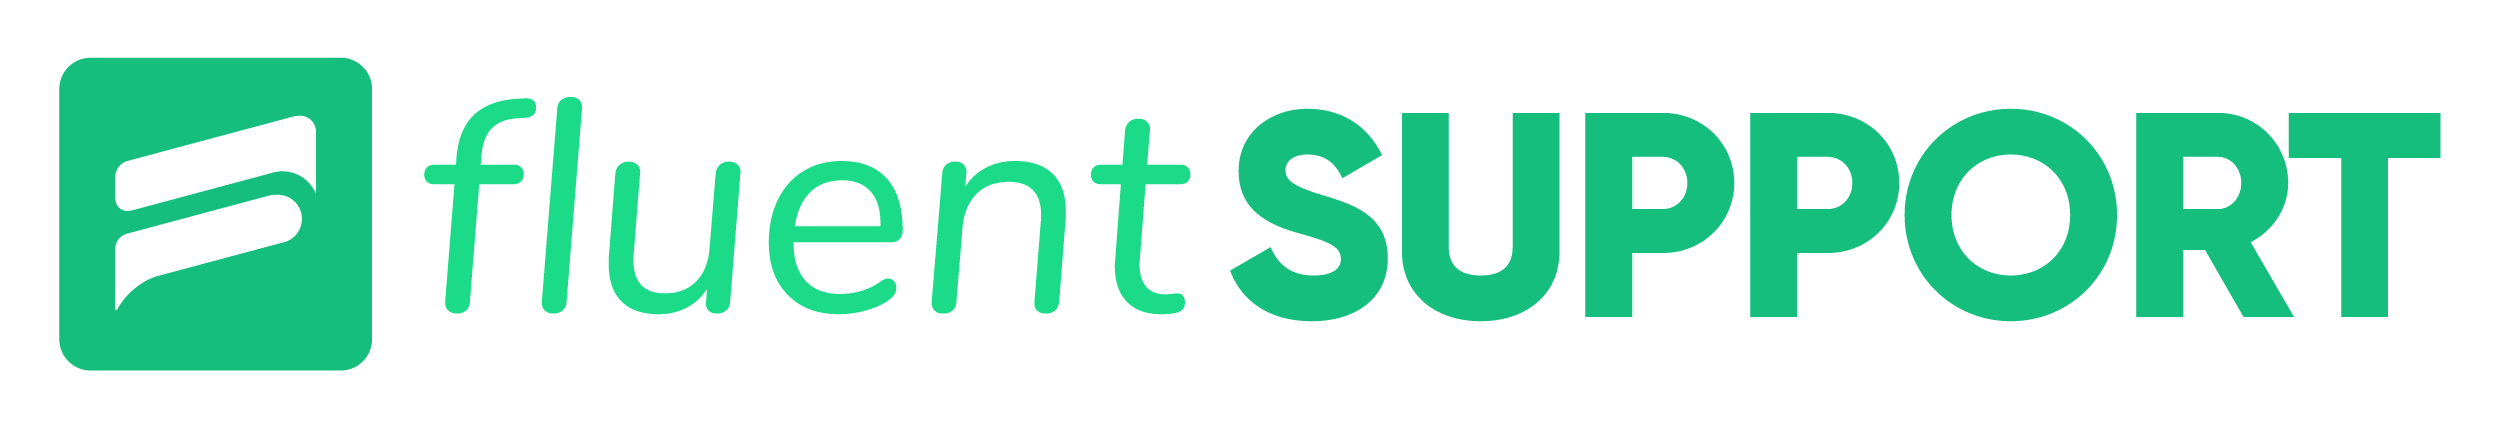 FS_logo_with_text